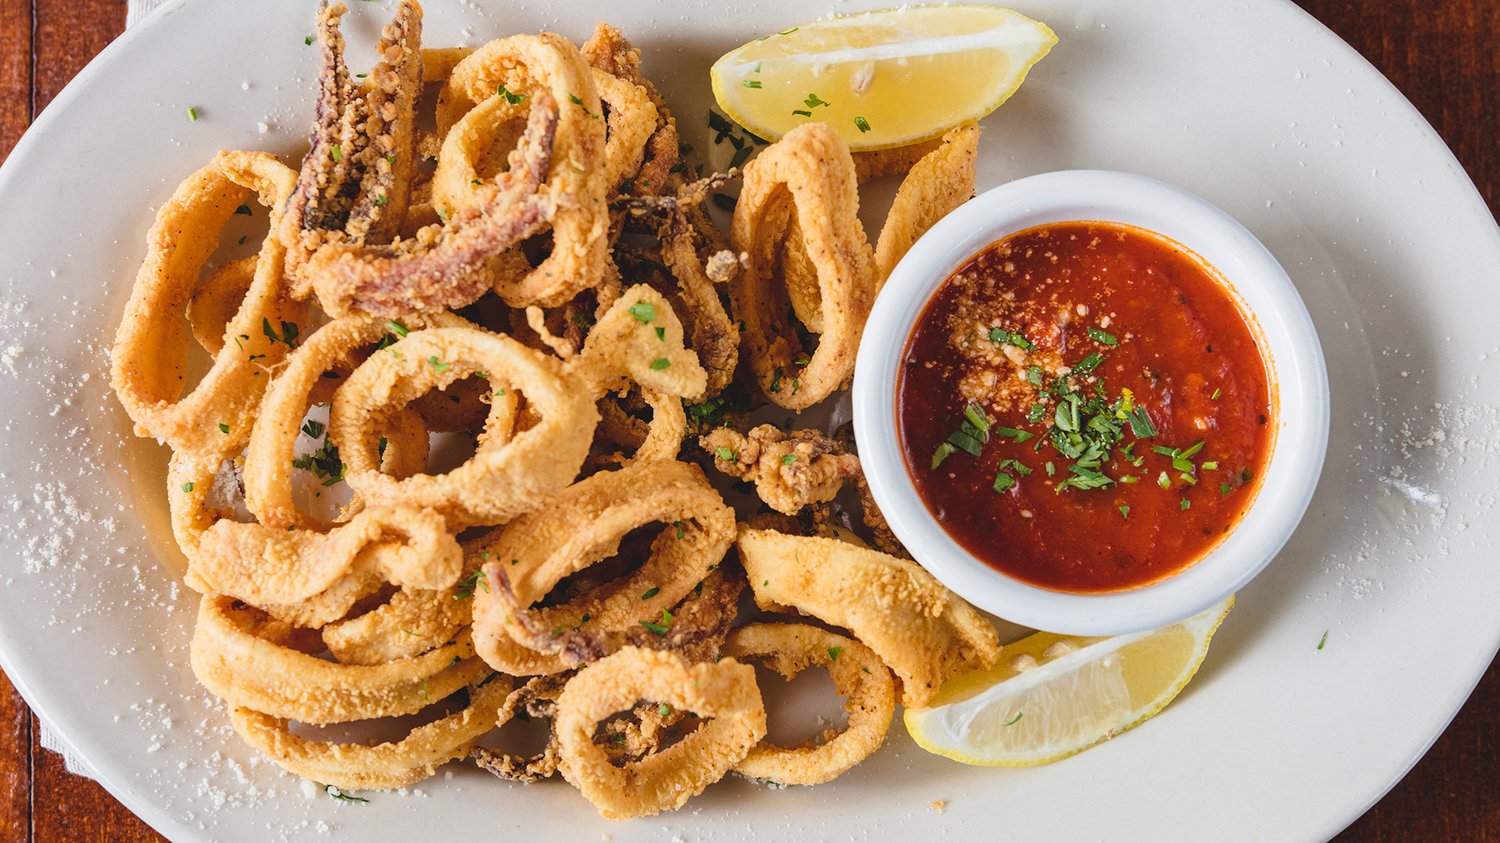 Was it Really the Calamari? Sports, Squid, & Superstitions